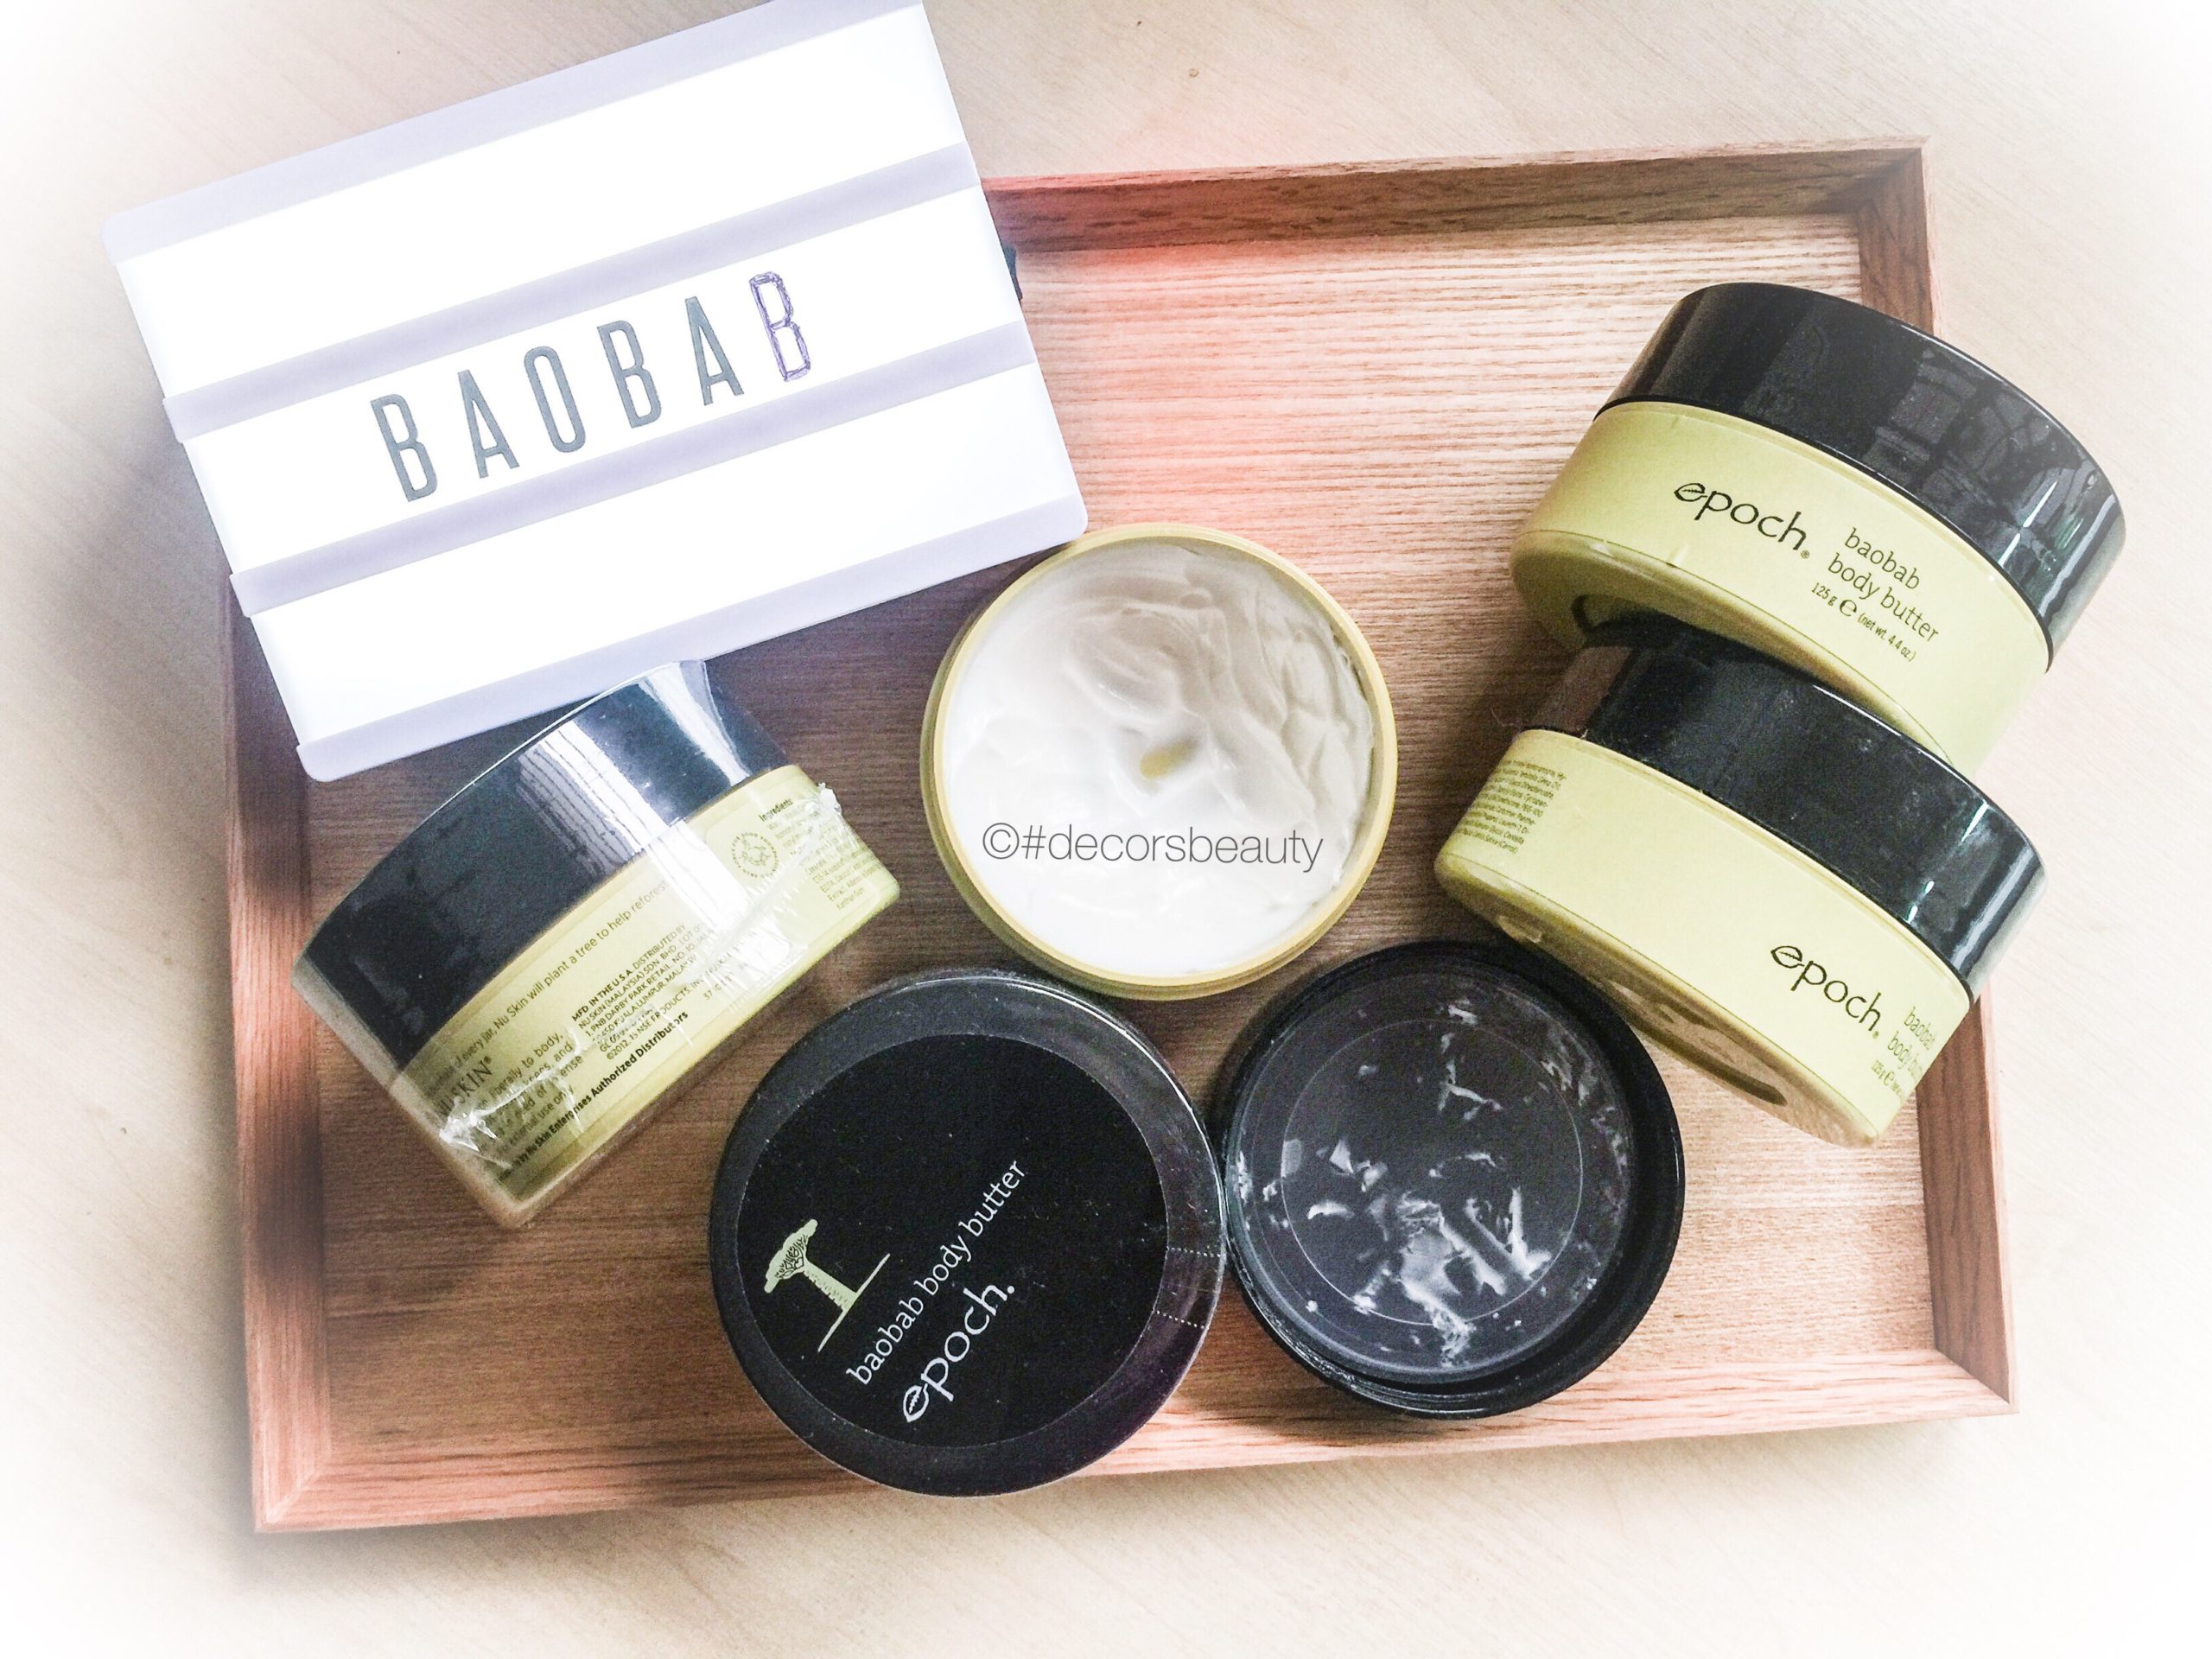 How To Get Baobab Body Butter at Distributor Price Wholesale Price VIP Price Preferred Customer Price Cheapest Price by decorsbeauty 2